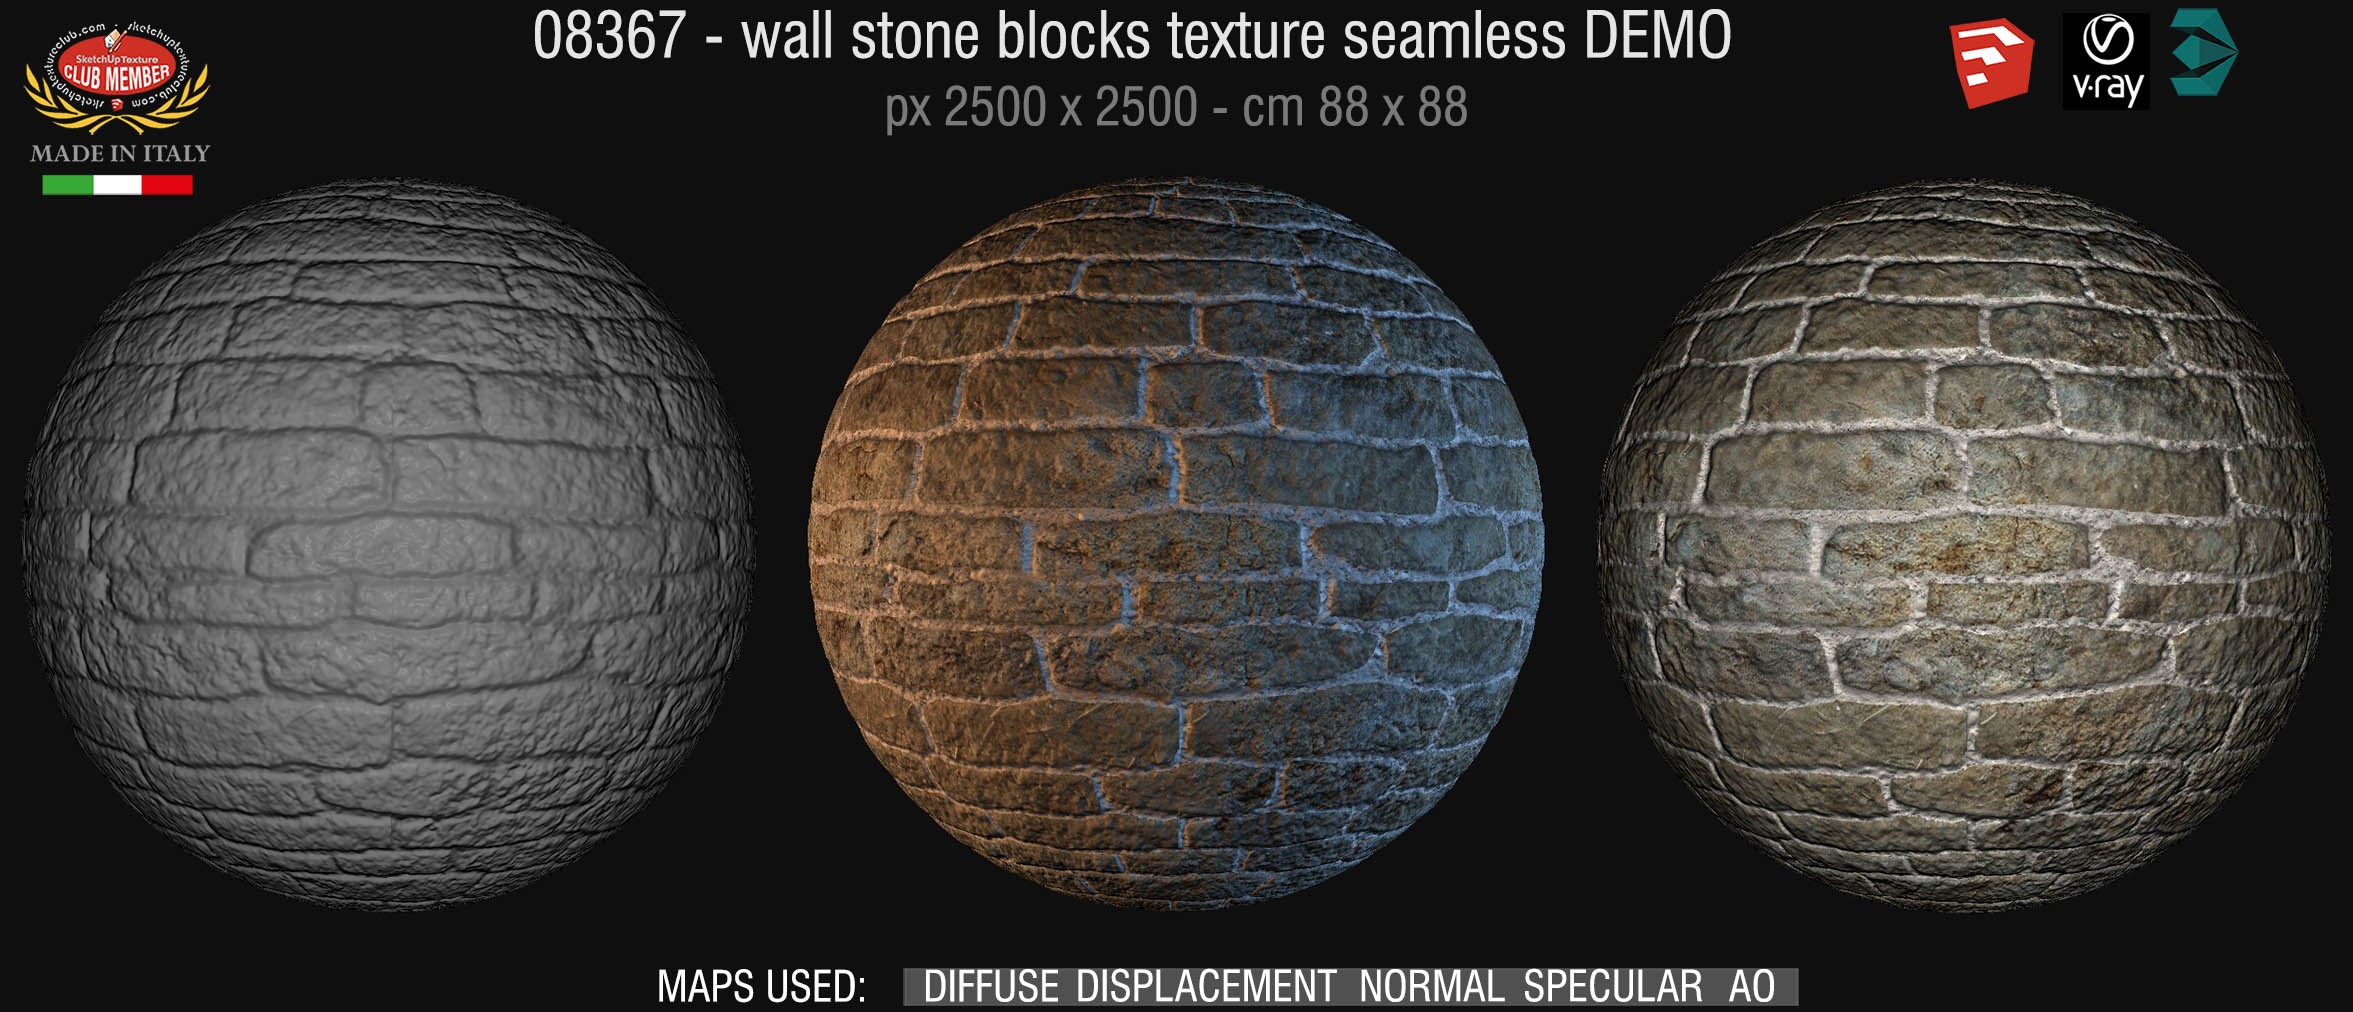 08367 HR Wall stone with regular blocks texture + maps DEMO